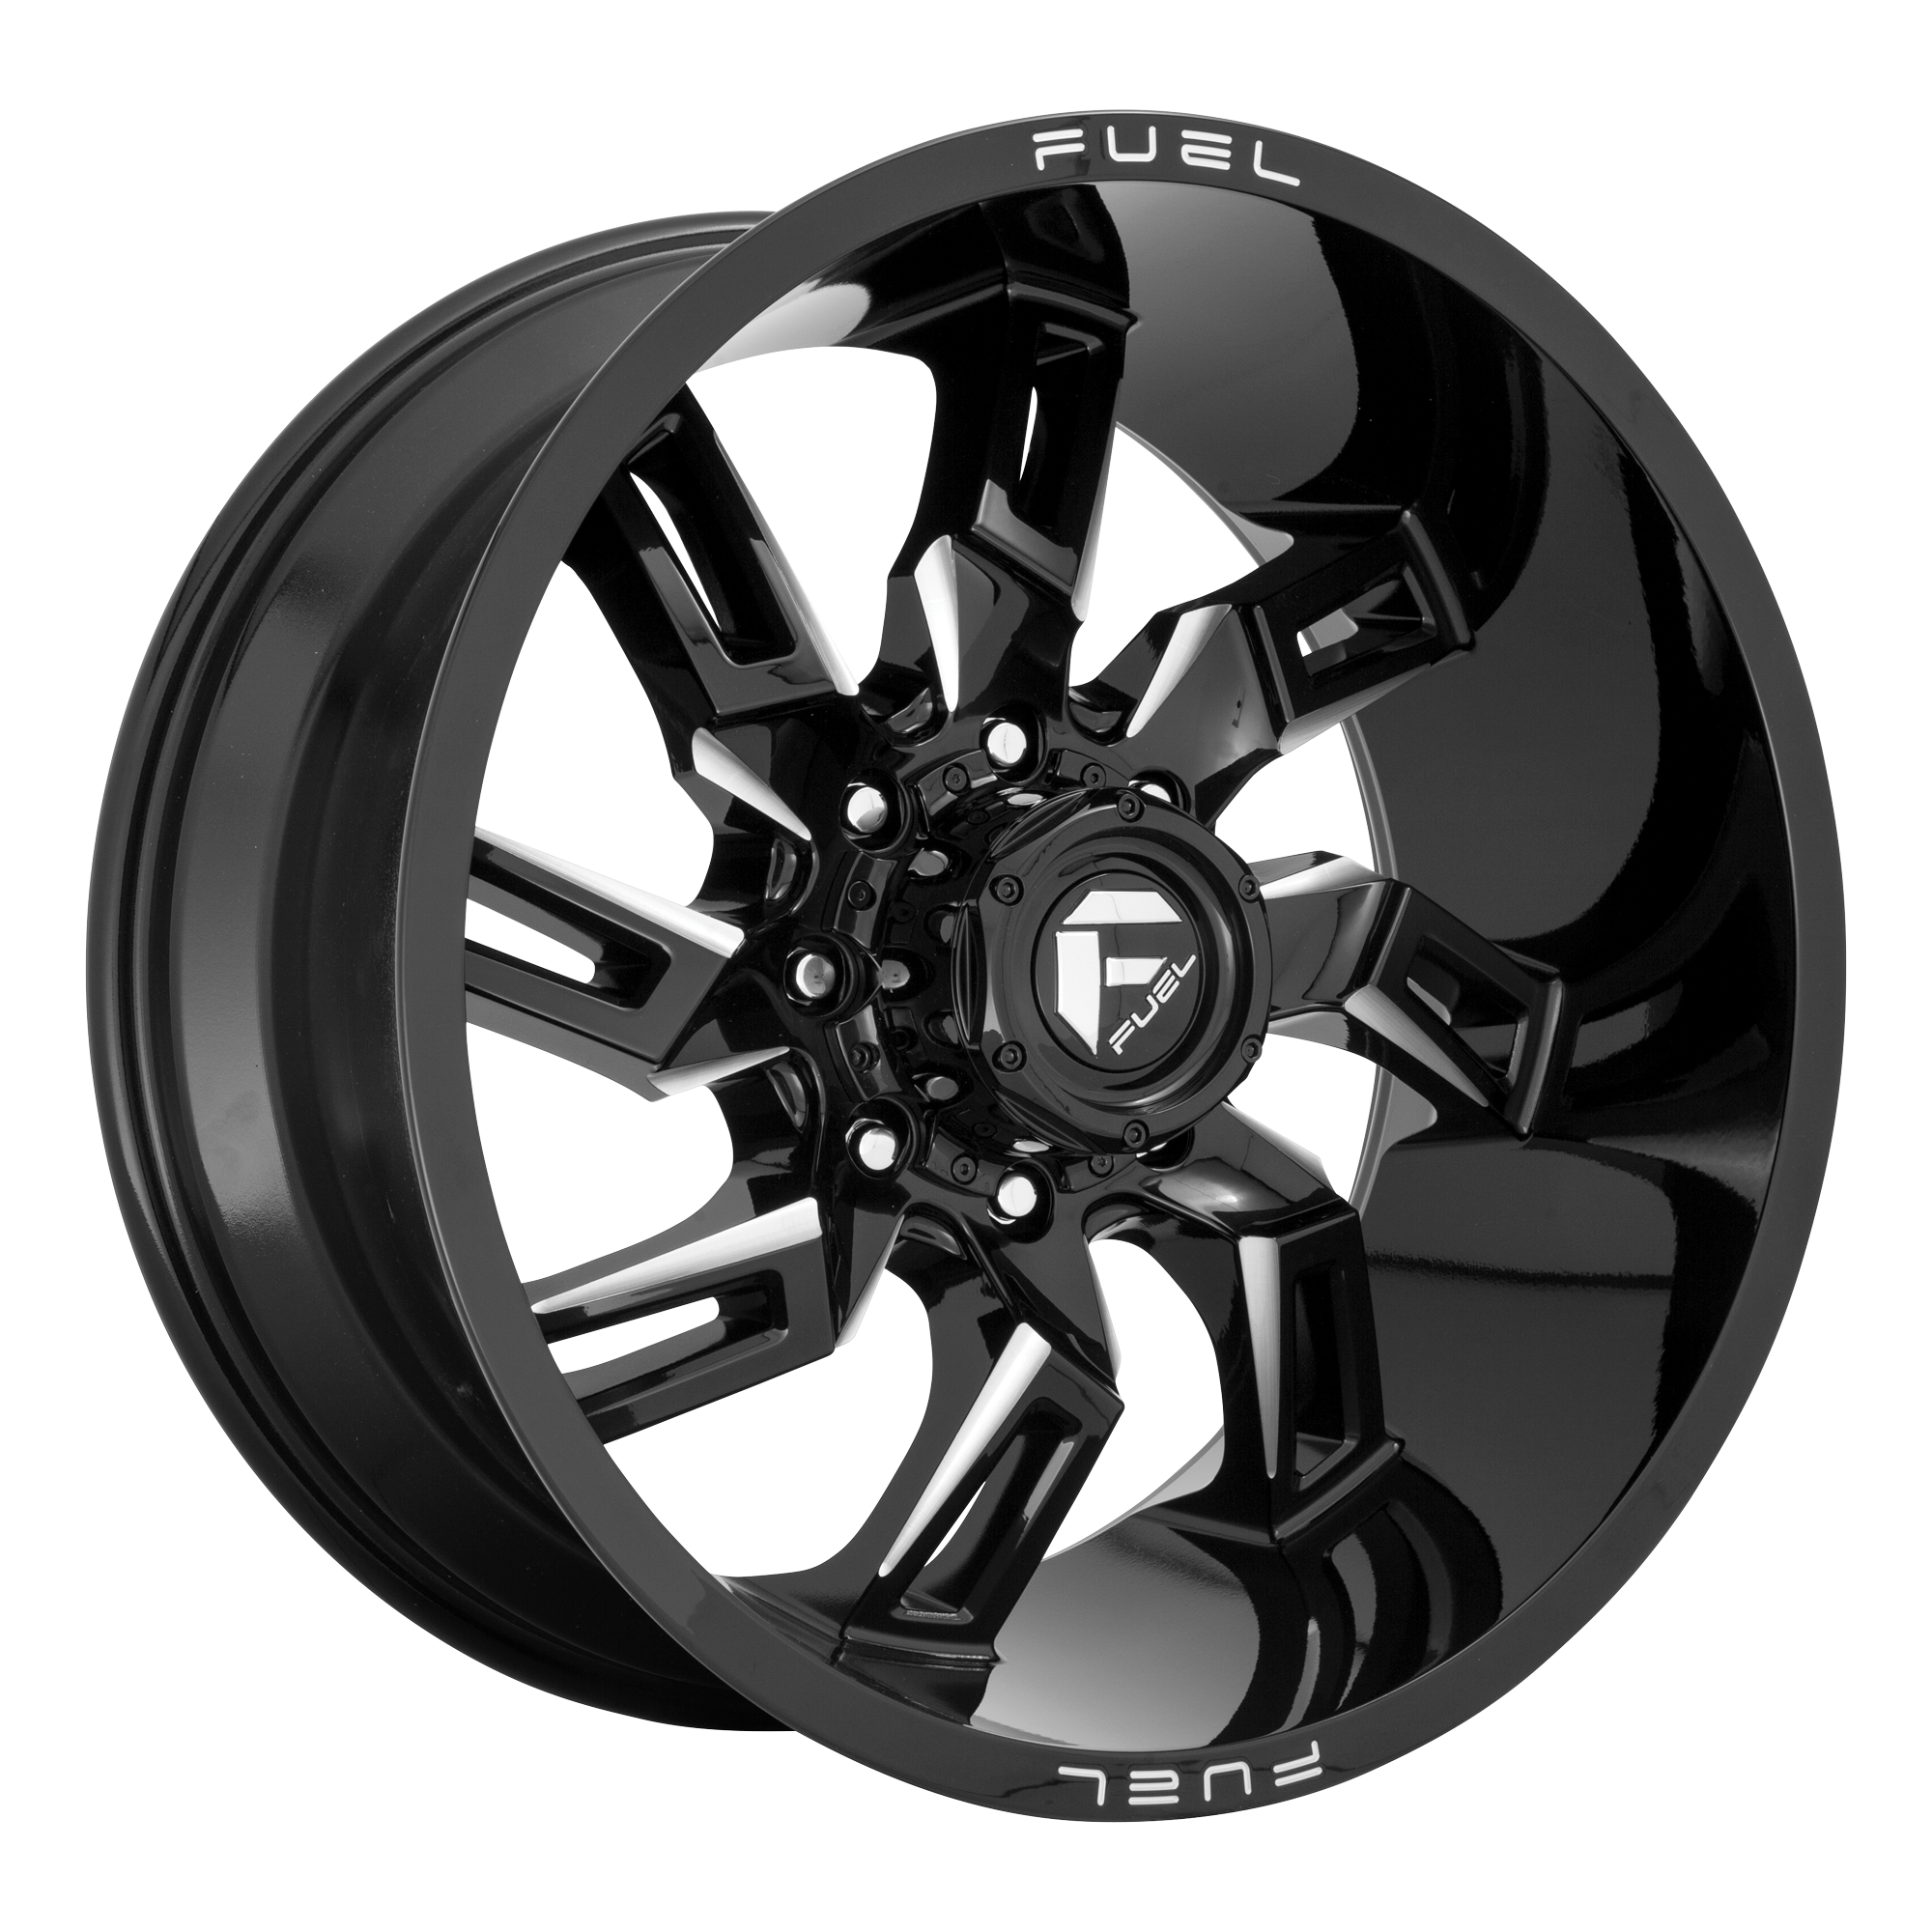 LOCKDOWN 20x9 8x180.00 GLOSS BLACK MILLED (1 mm) - Tires and Engine Performance